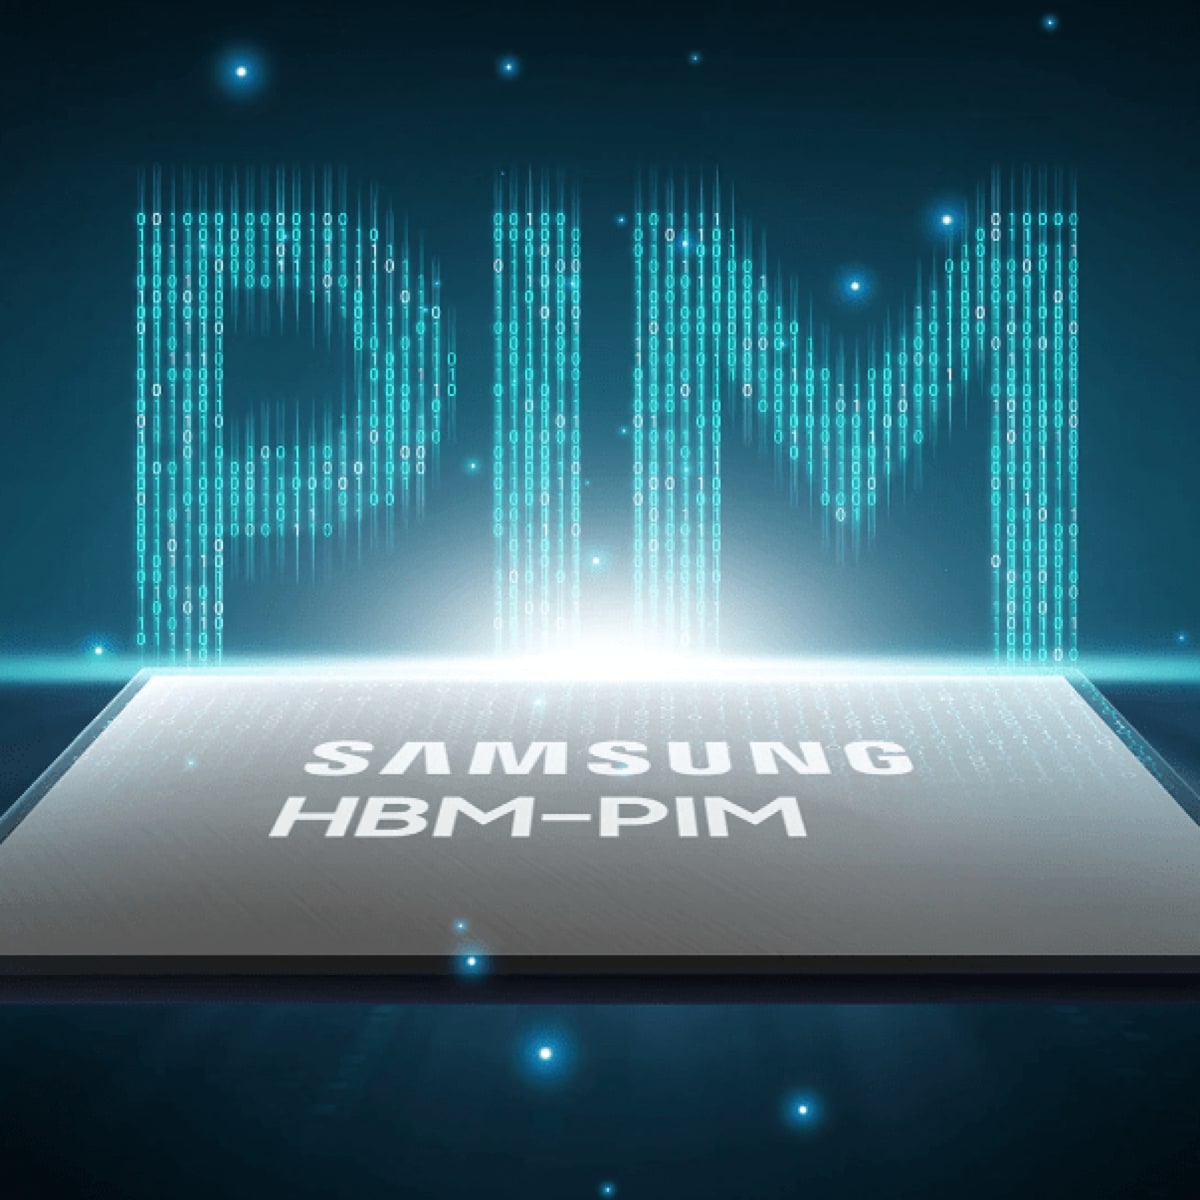 This is the HBM-PIM, one of the Samsung Semiconductor products introduced at Memcon 2023.